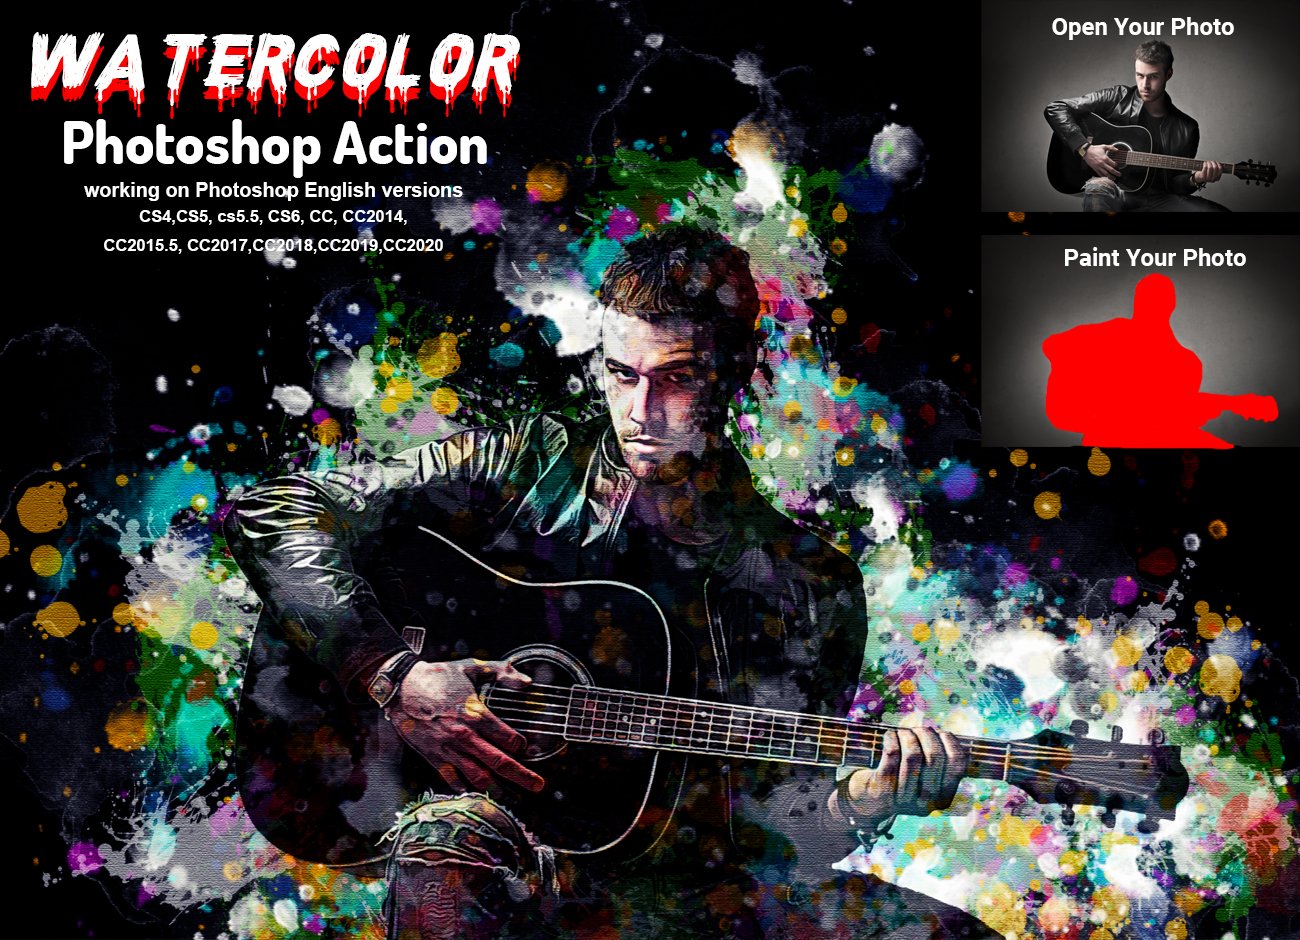 Watercolor Photoshop Actioncover image.